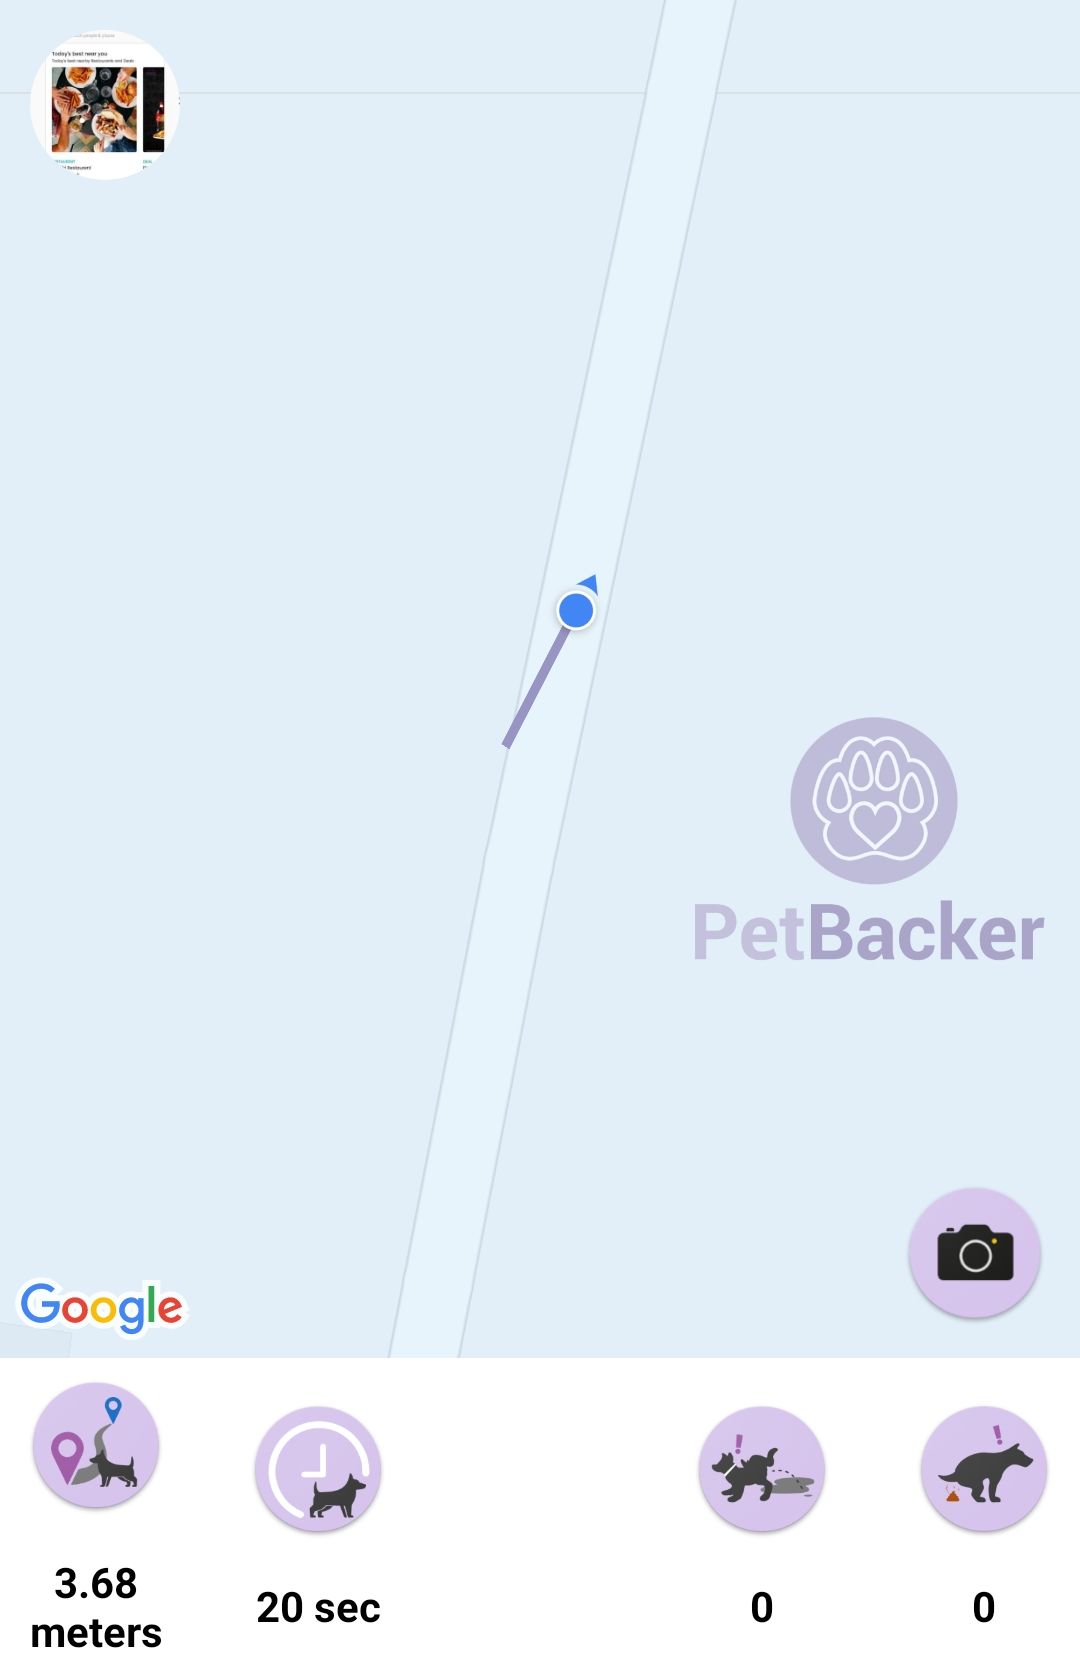 Just completed pet walking of 3.68 meters with My puppy